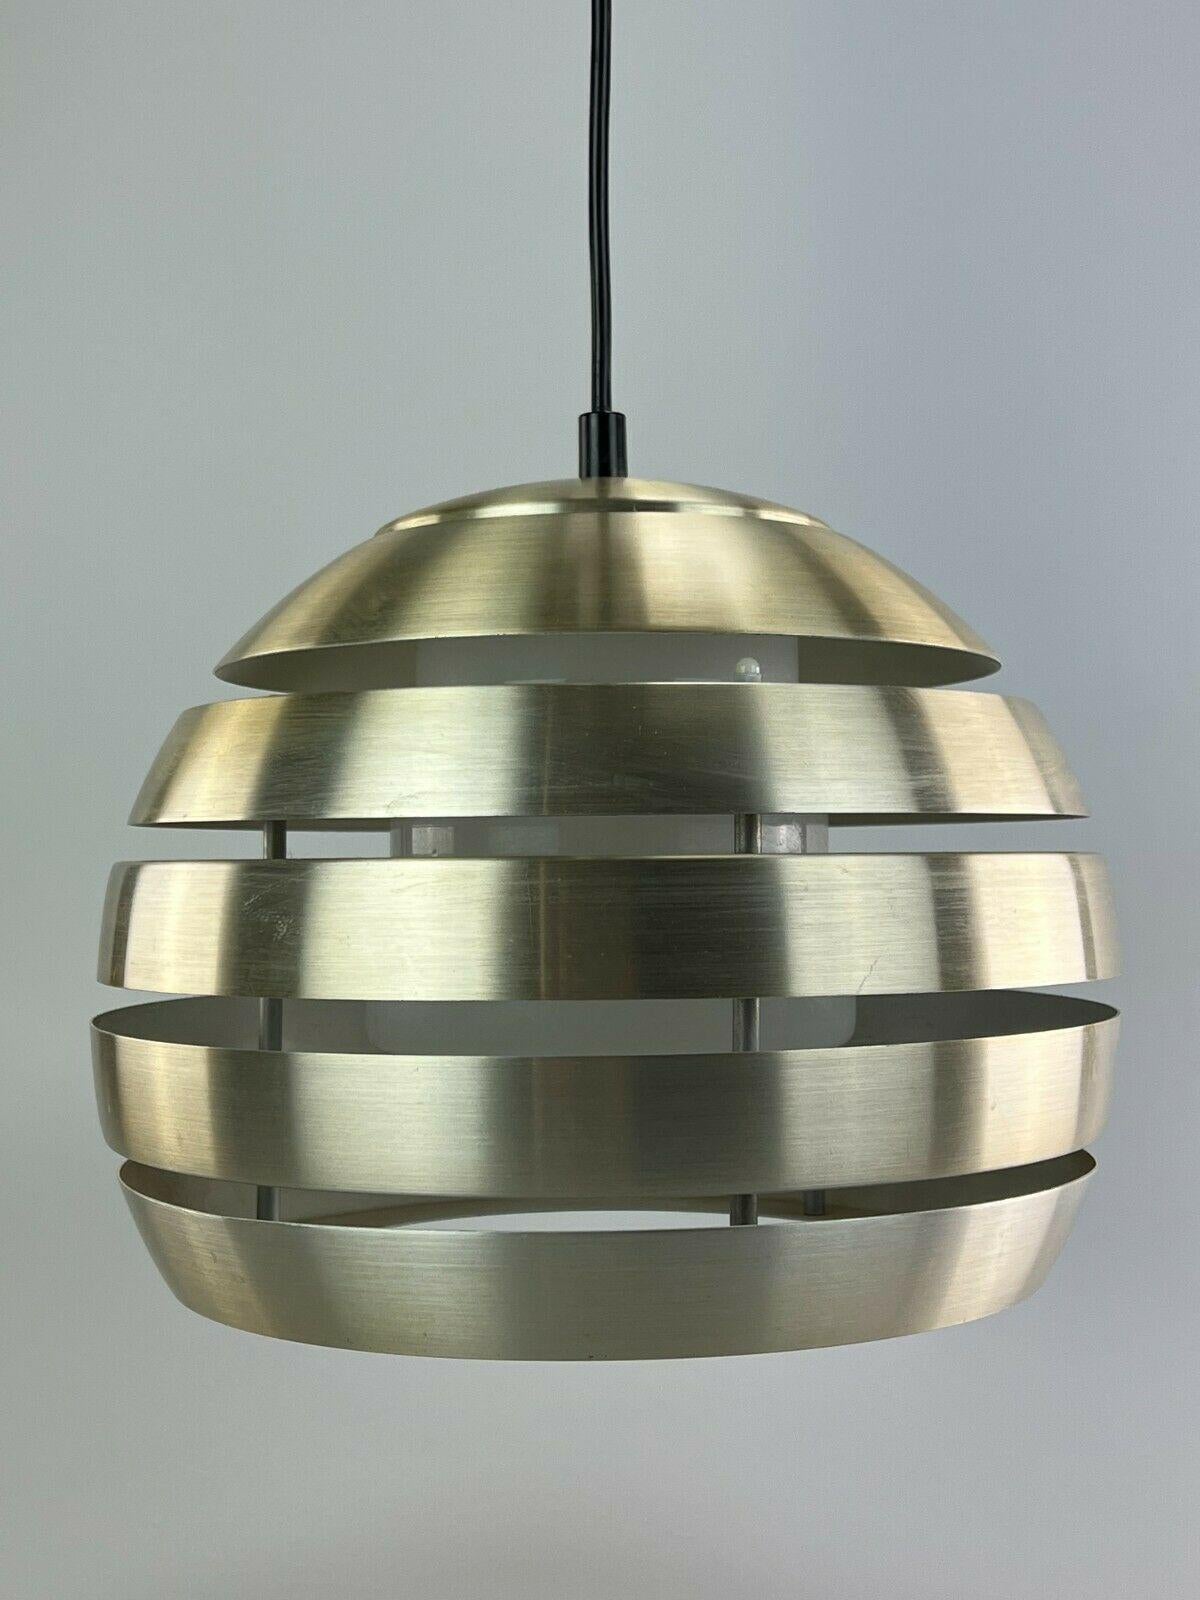 60s 70s lamp light ceiling lamp aluminum space age design 60s 70s

Object: ceiling lamp

Manufacturer:

Condition: good - vintage

Age: around 1960-1970

Dimensions:

Diameter = 30cm
Height = 24cm

Other notes:

The pictures serve